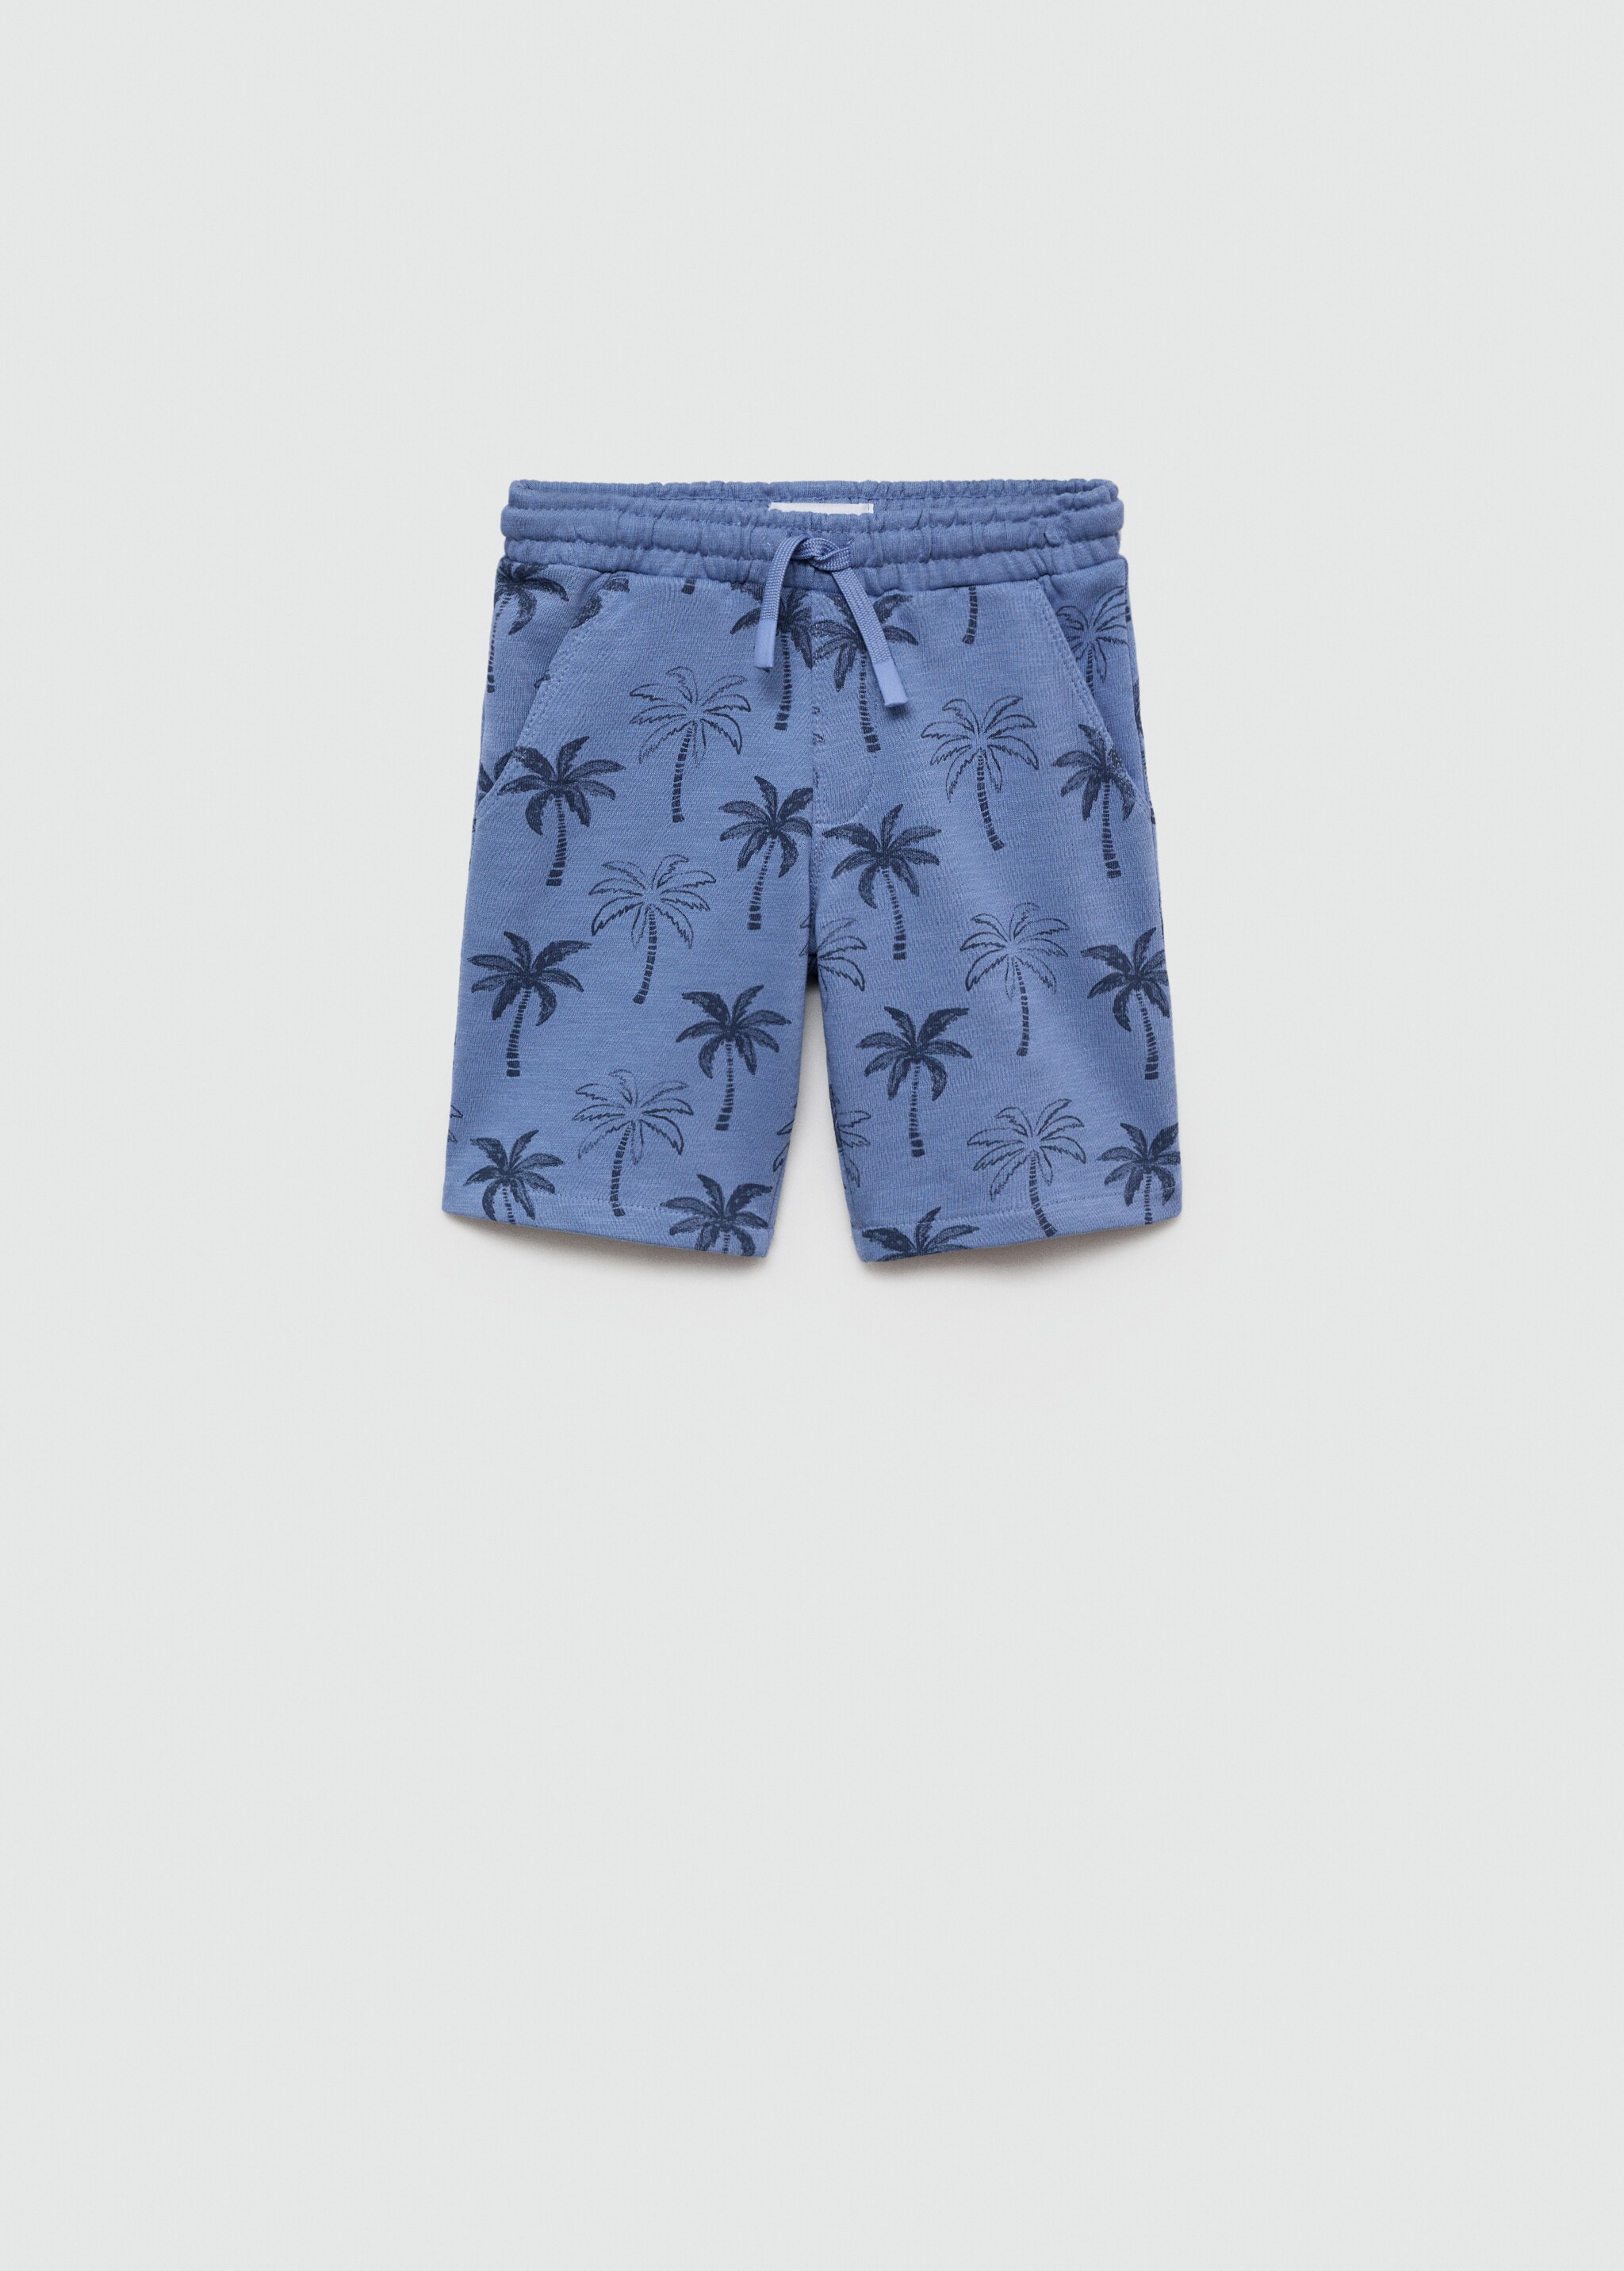 Palm trees print Bermuda shorts - Article without model